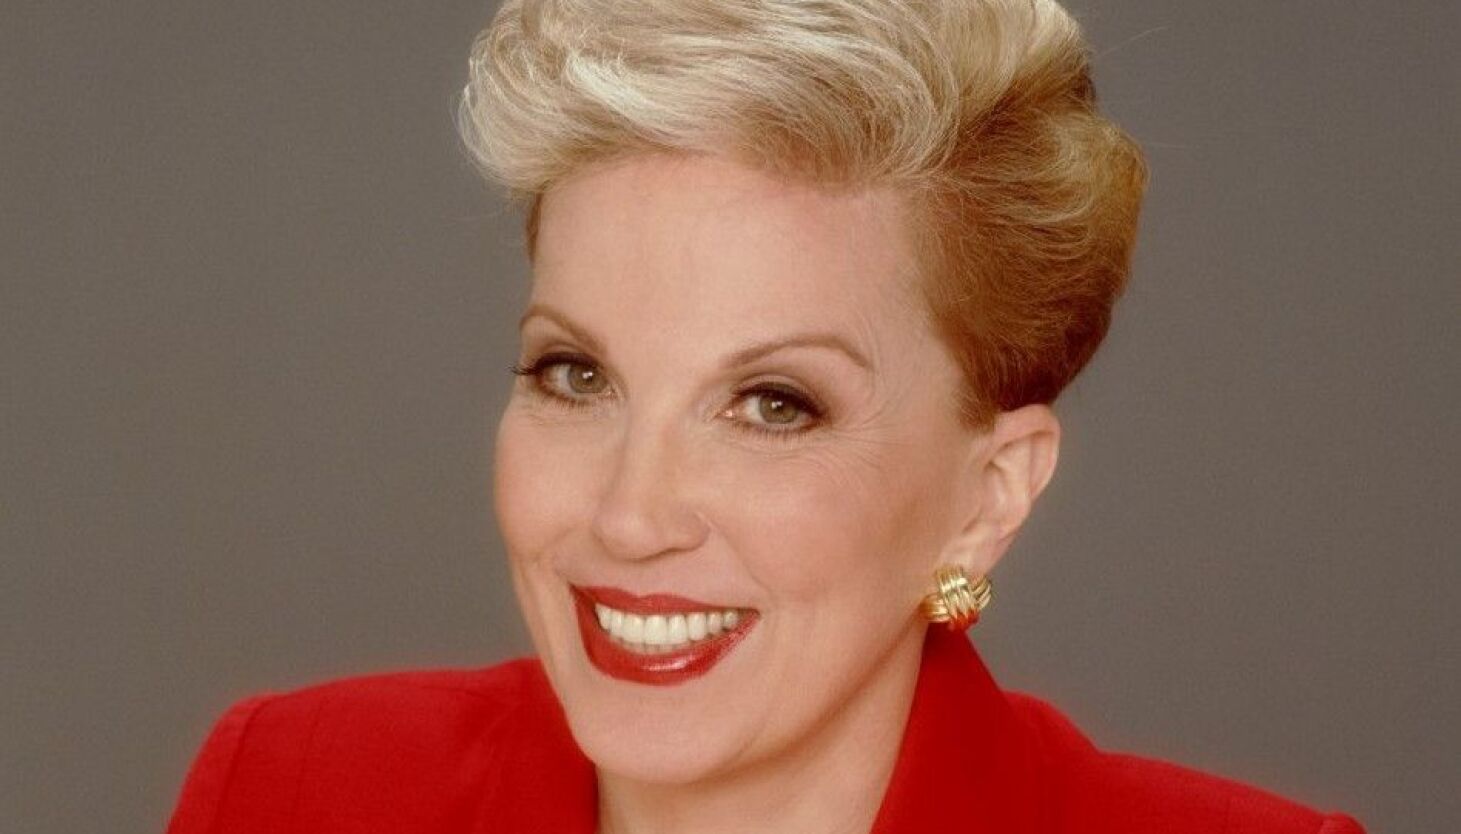 Dear Abby: My brain keeps reminding me of unhappy events in my past